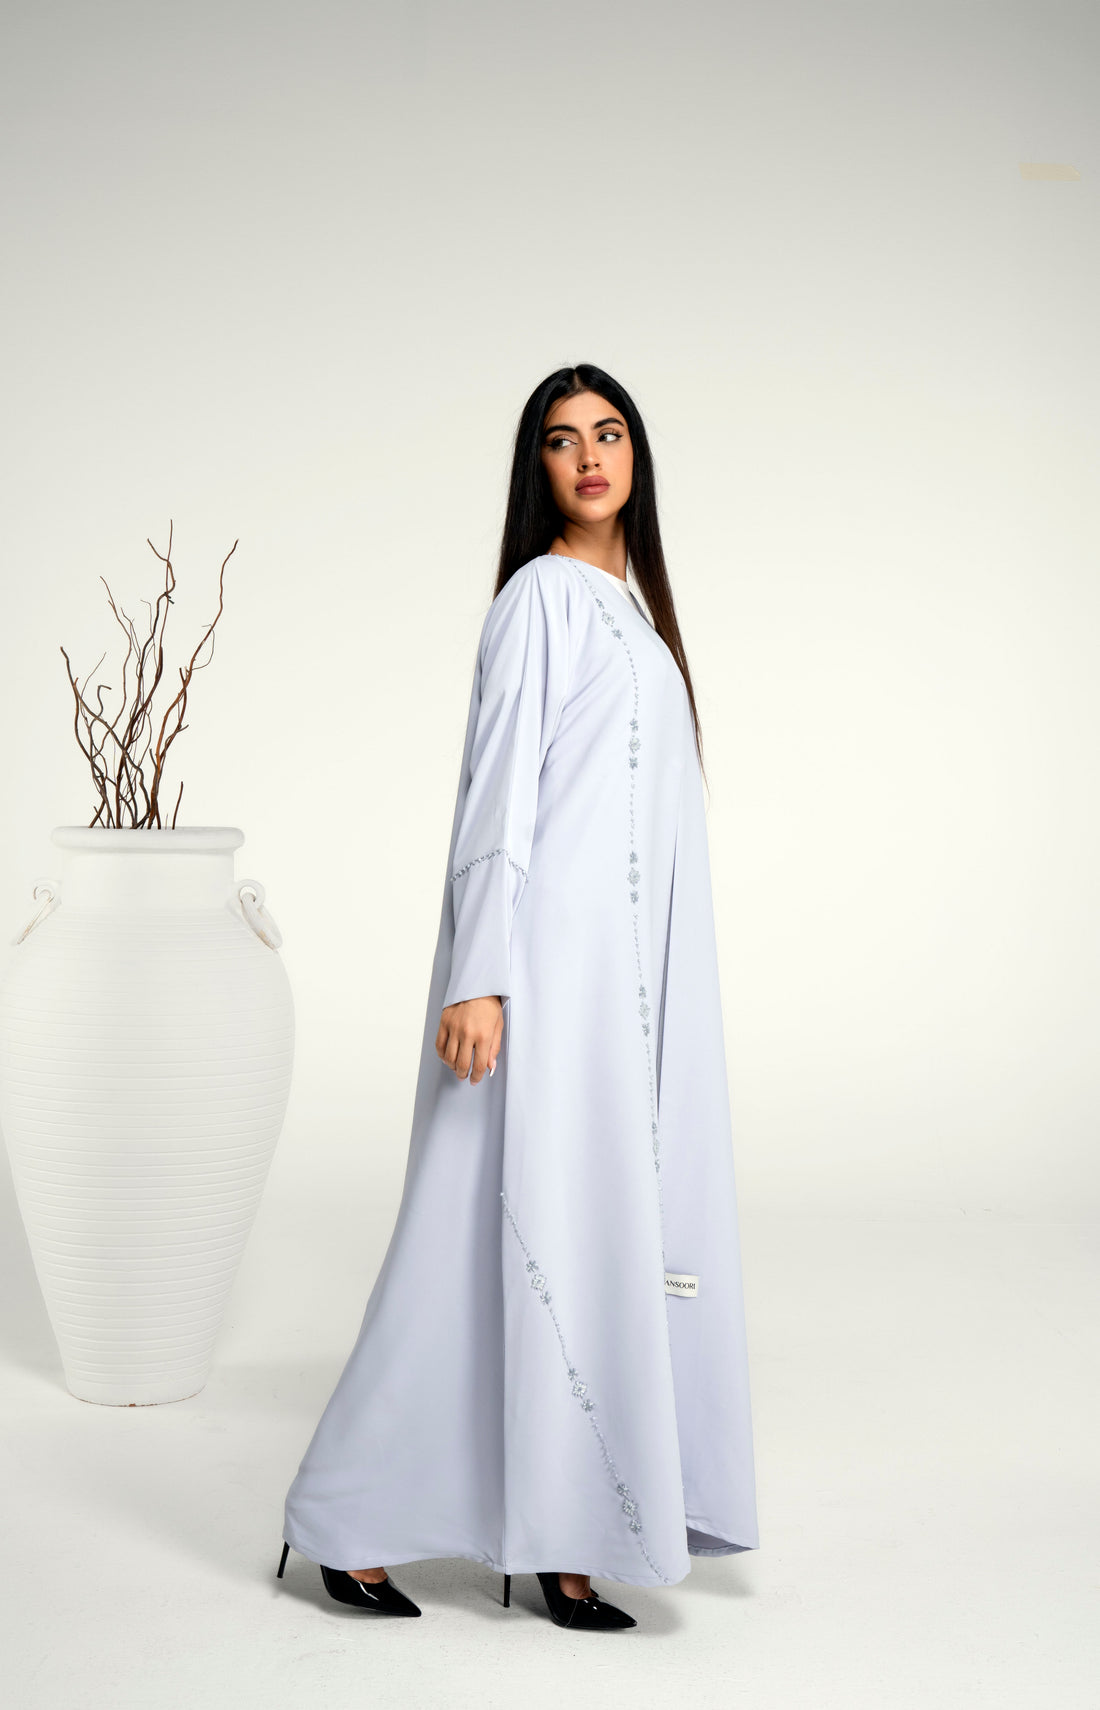 Elevate Your Style: Get a Classy Look With These 3 Abayas